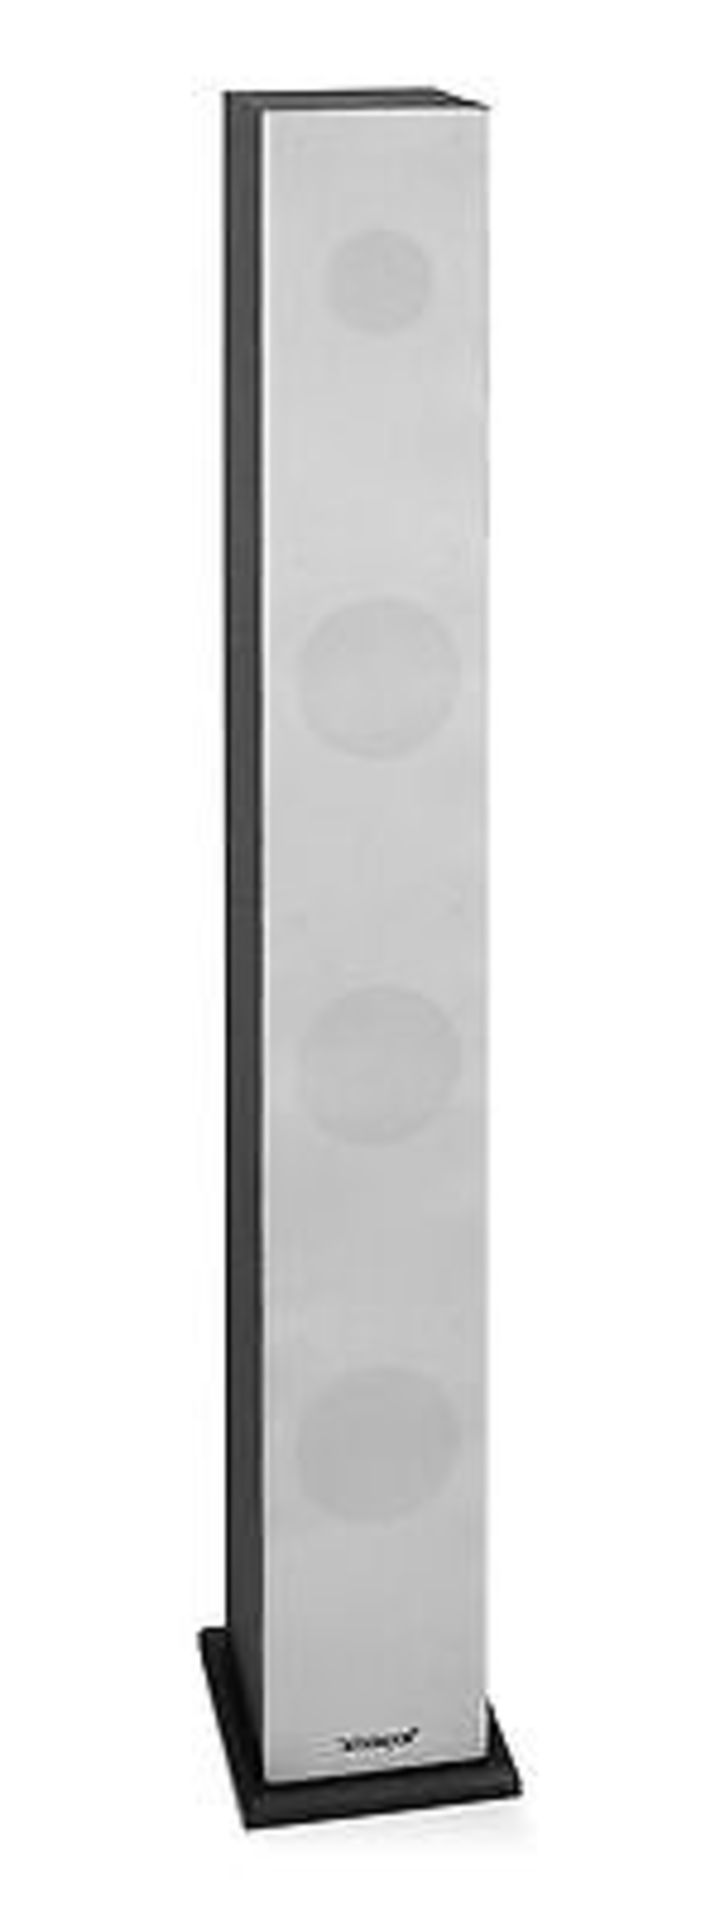 V Brand New Intempo Large Bluetooth Tower Speaker - Wooden Case and Base - 100cm Height - 2" Tweeter - Image 2 of 2